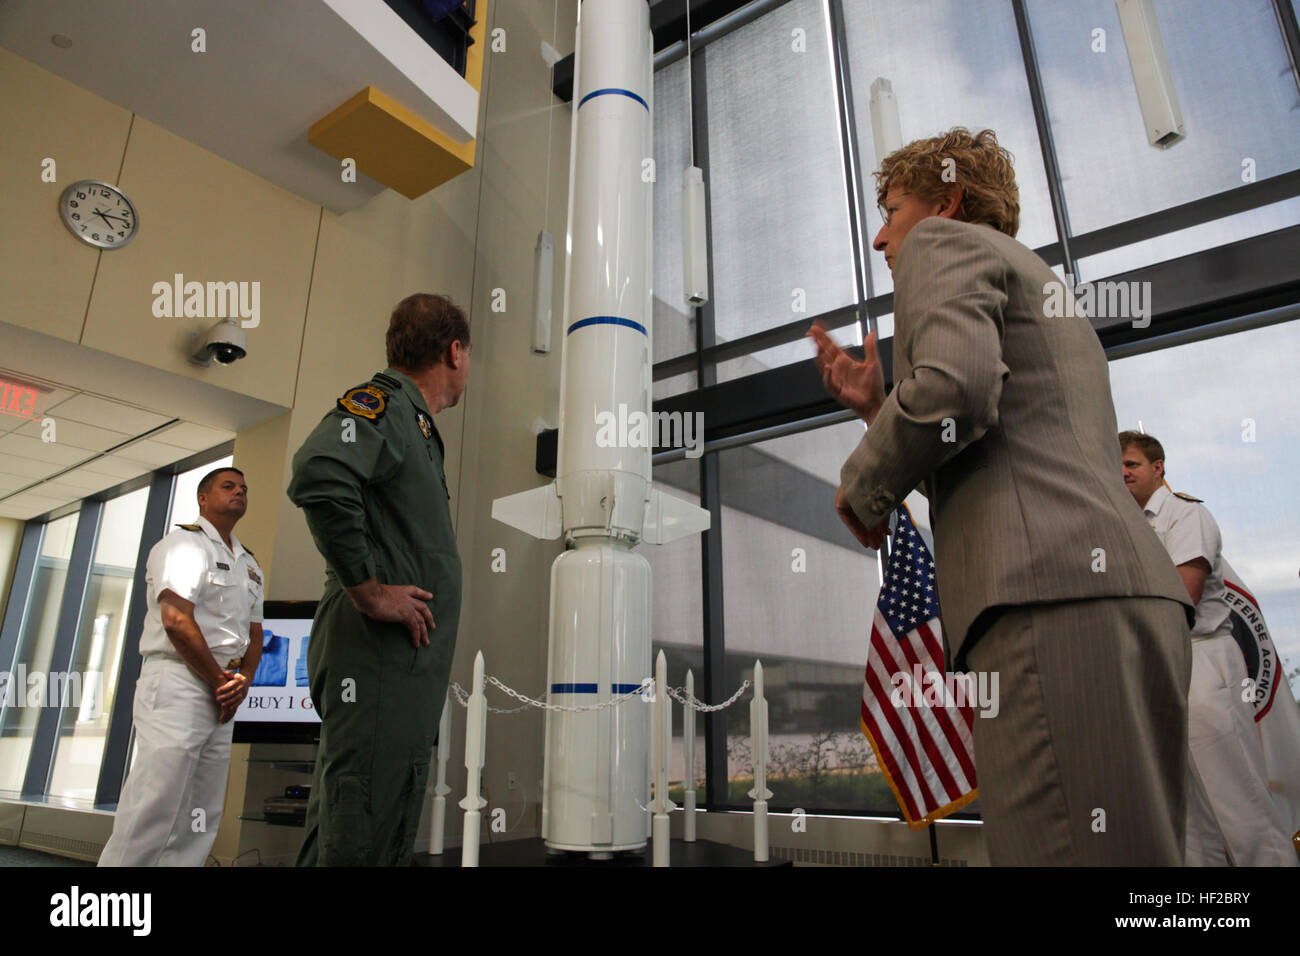 The First Sea Lord and Chief of Naval Staff of the British Royal Navy, Adm. Sir George Zambellas, left, receives a tour of the Missile Defense Agency by Laura DeSimone at Dahlgren, Va., July 29, 2014. Zambellas is taking part in the Commandant of the Marine Corps' Counterpart Program, which invites foreign military leaders to visit the United States and interact with U.S. military leaders. (U.S. Marine Corps photo by Cpl. Michael C. Guinto/Released) First Sea Lord Counterpart Visit 140729-M-LI307-466 Stock Photo